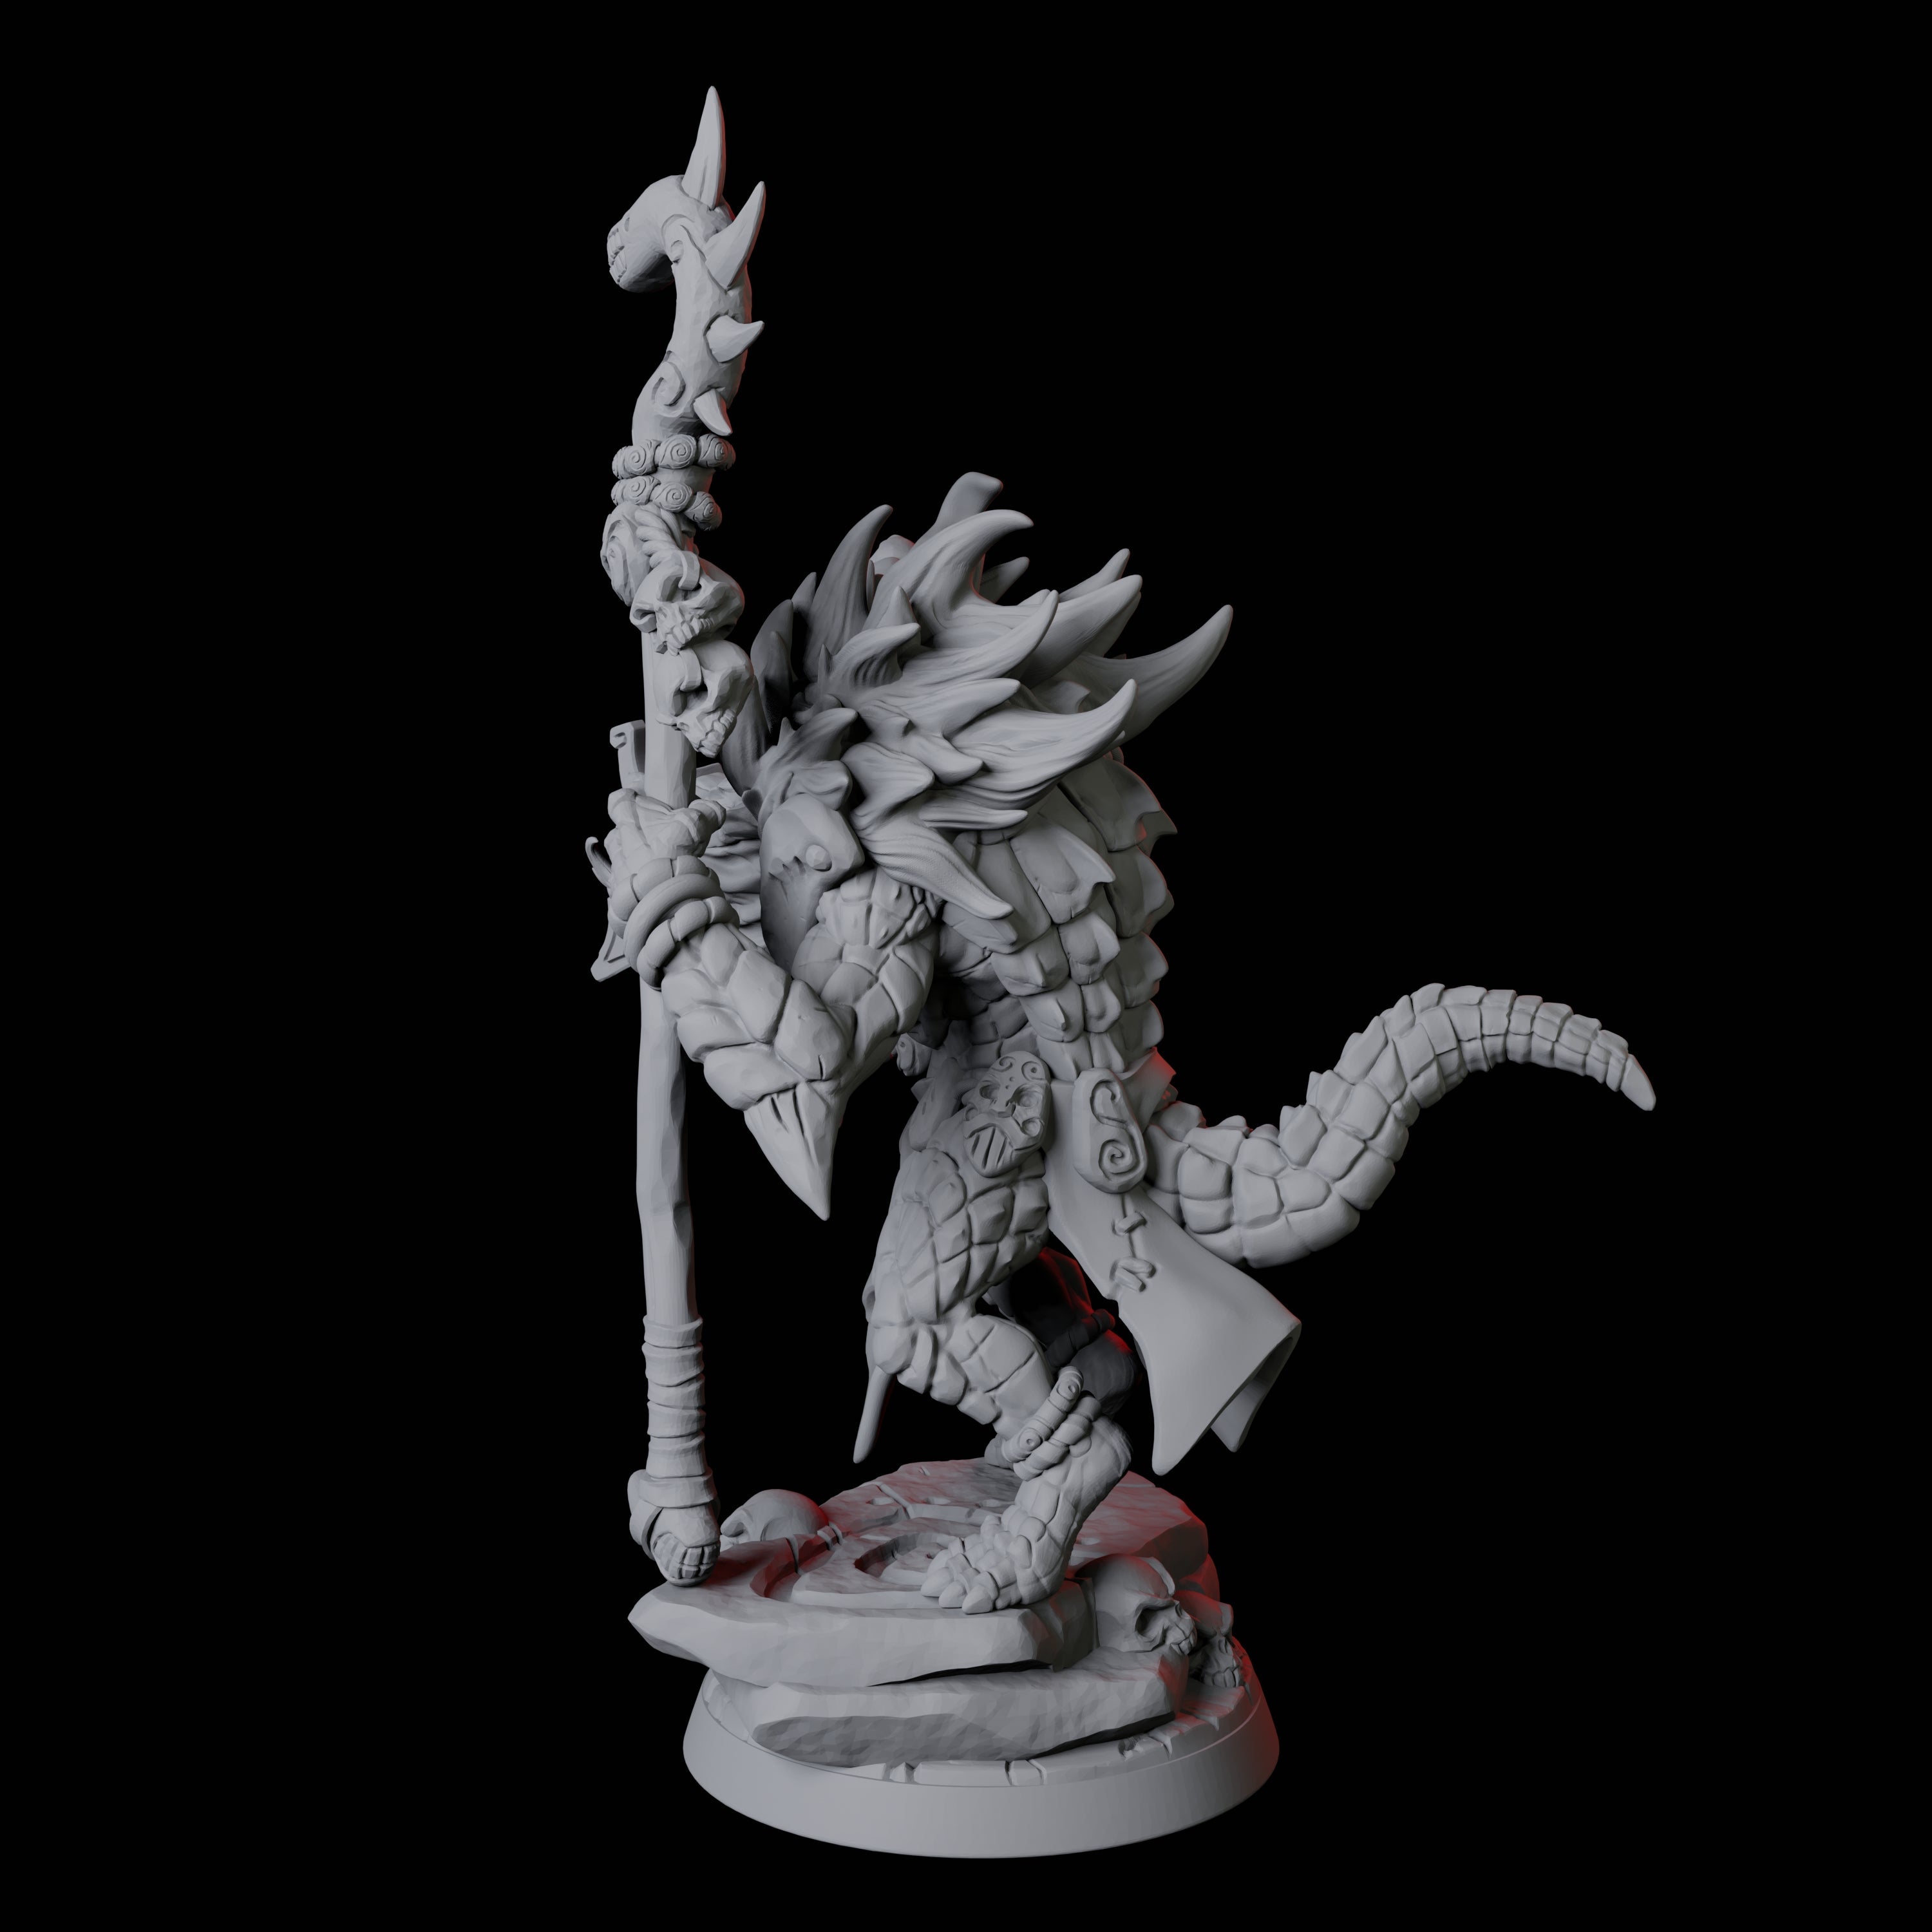 Old Lizardfolk Wizard Miniature for Dungeons and Dragons, Pathfinder or other TTRPGs